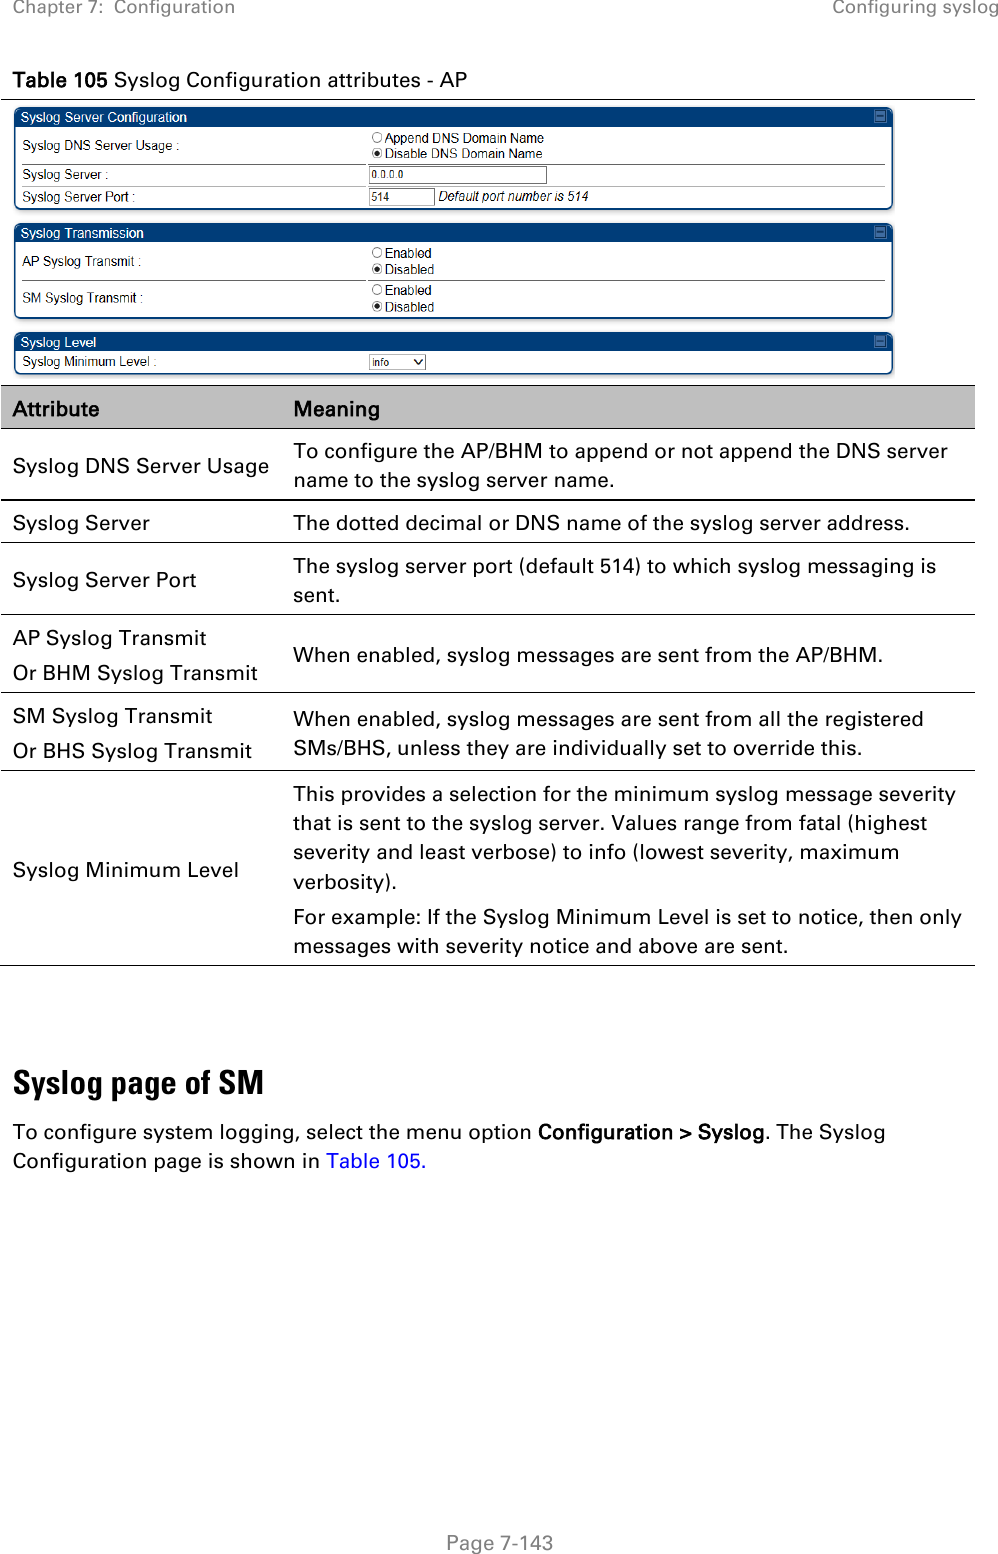 Chapter 7:  Configuration Configuring syslog   Page 7-143 Table 105 Syslog Configuration attributes - AP  Attribute Meaning Syslog DNS Server Usage  To configure the AP/BHM to append or not append the DNS server name to the syslog server name.  Syslog Server  The dotted decimal or DNS name of the syslog server address.  Syslog Server Port  The syslog server port (default 514) to which syslog messaging is sent.  AP Syslog Transmit  Or BHM Syslog Transmit When enabled, syslog messages are sent from the AP/BHM. SM Syslog Transmit  Or BHS Syslog Transmit  When enabled, syslog messages are sent from all the registered SMs/BHS, unless they are individually set to override this.  Syslog Minimum Level This provides a selection for the minimum syslog message severity that is sent to the syslog server. Values range from fatal (highest severity and least verbose) to info (lowest severity, maximum verbosity). For example: If the Syslog Minimum Level is set to notice, then only messages with severity notice and above are sent.   Syslog page of SM To configure system logging, select the menu option Configuration &gt; Syslog. The Syslog Configuration page is shown in Table 105. 